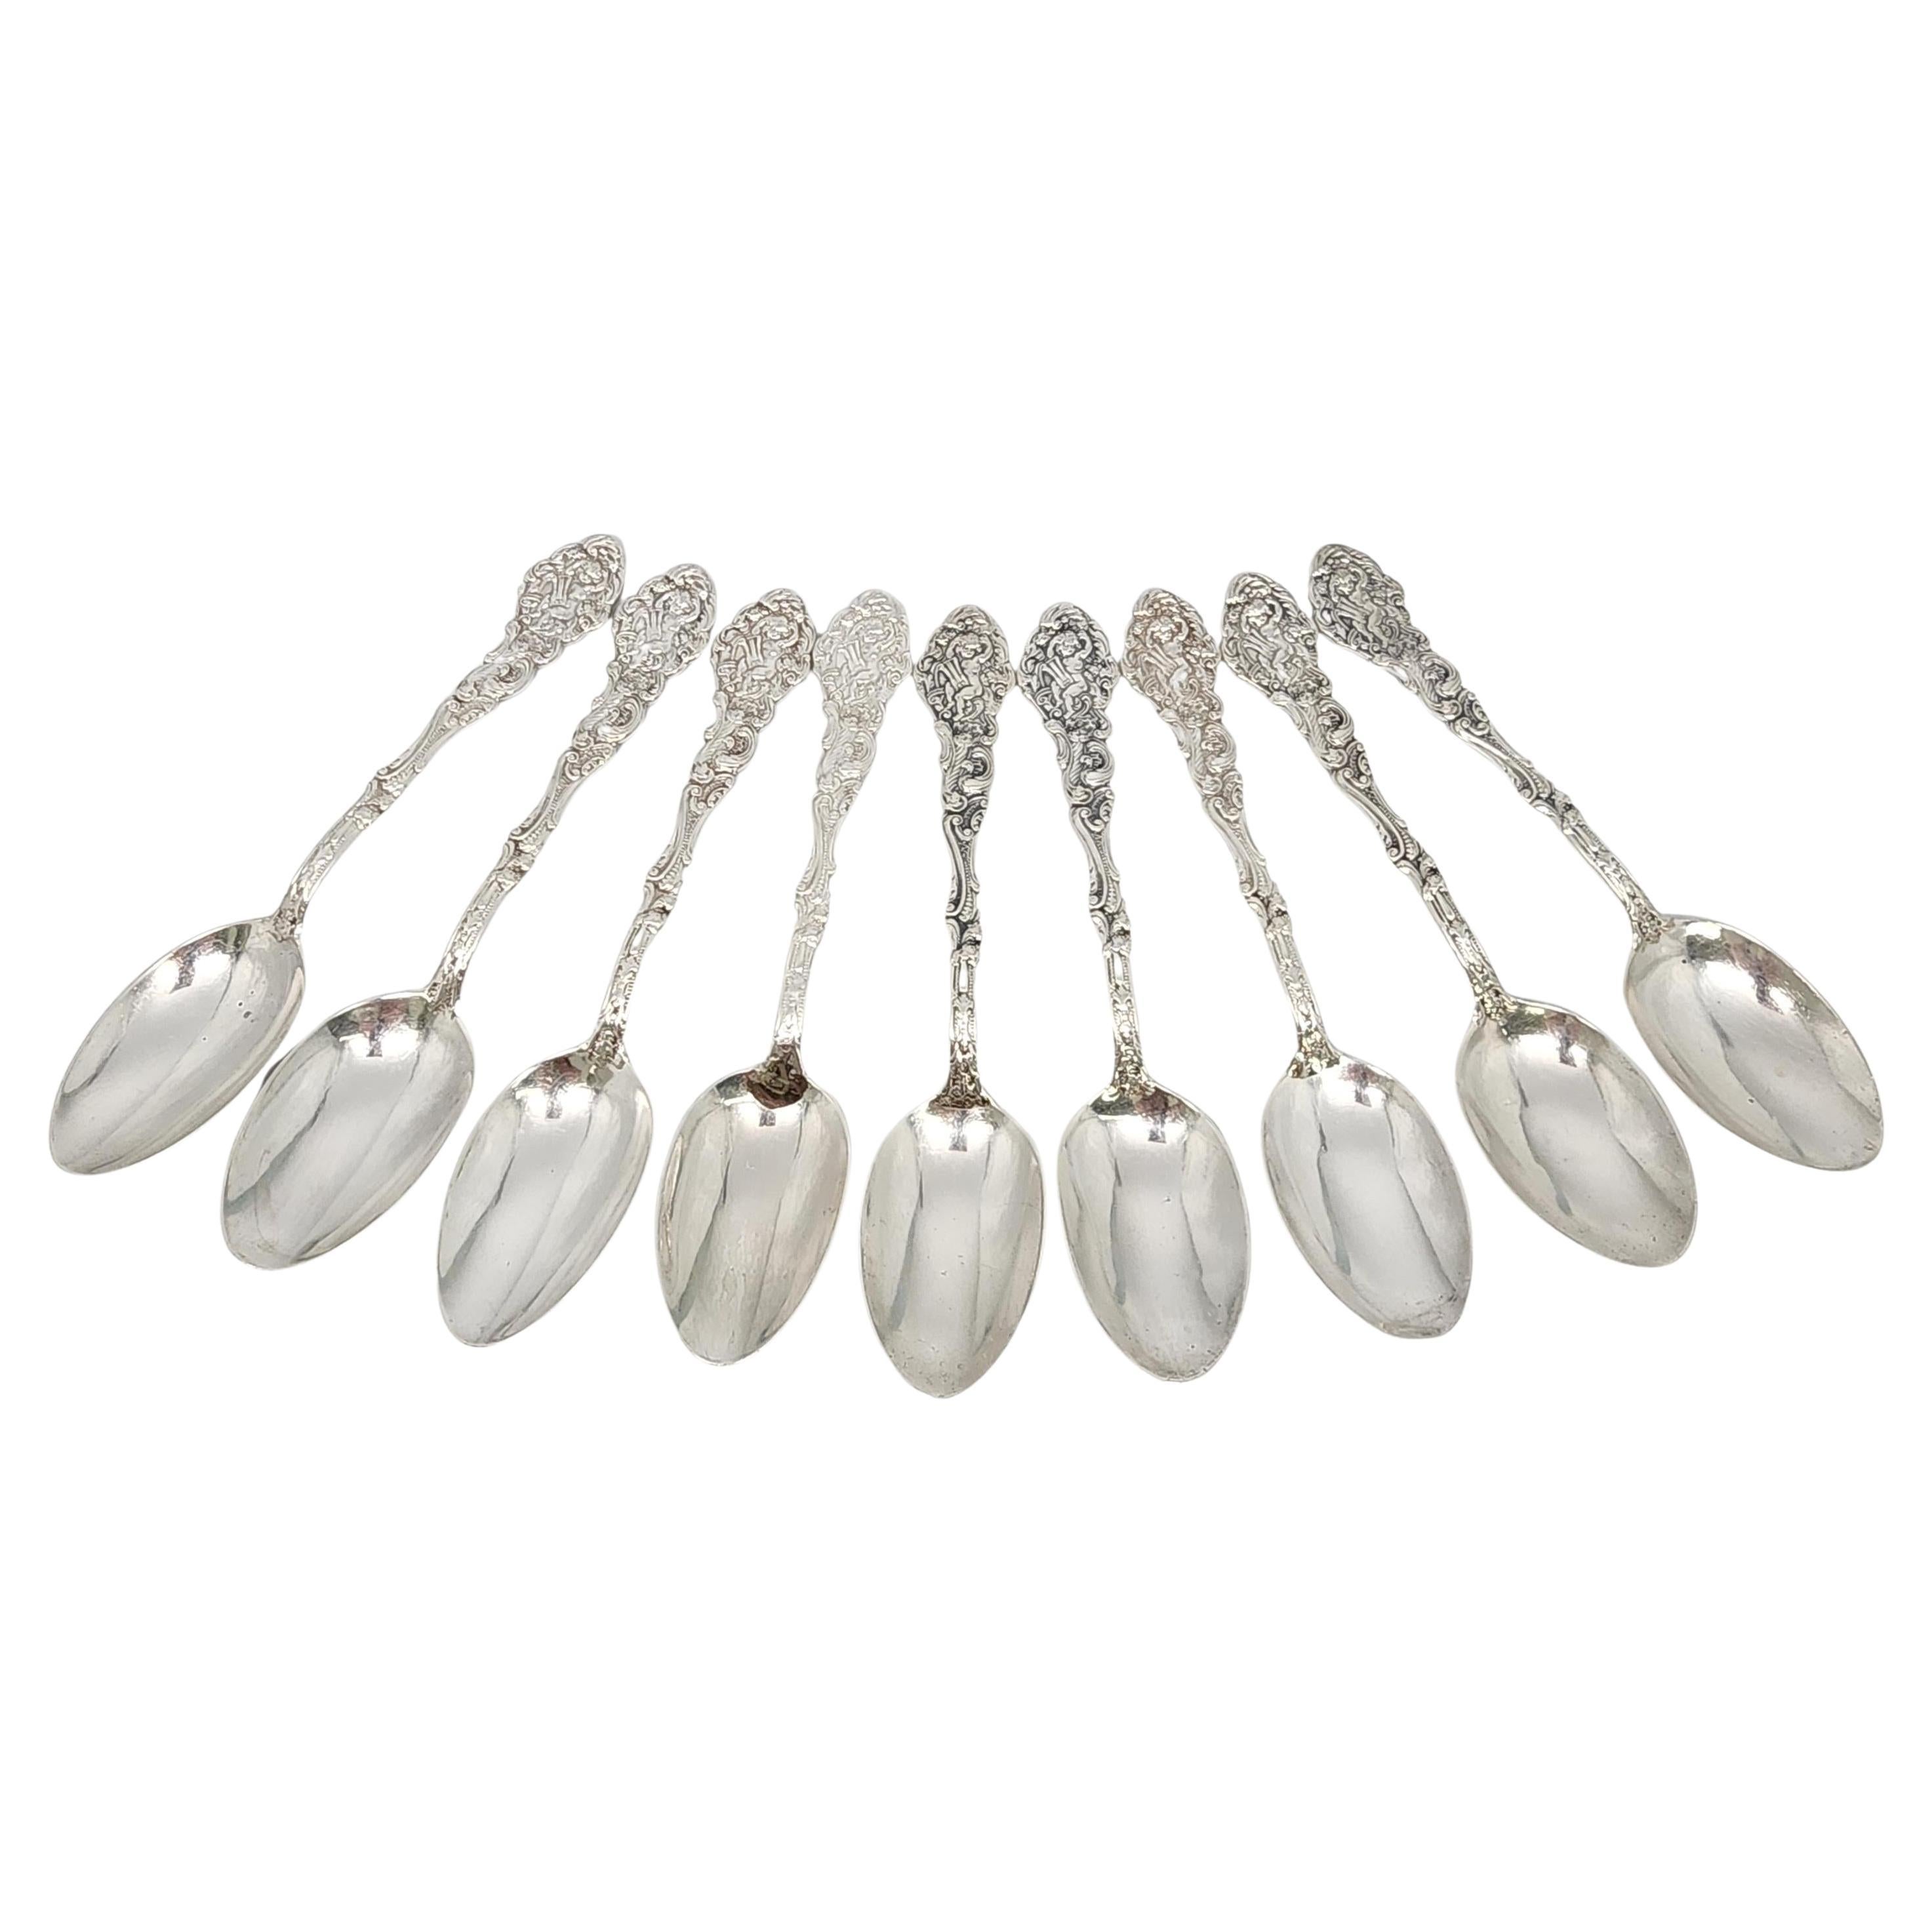 Set of 9 Gorham Versailles Sterling Silver Teaspoons 5 7/8" w/Mono #17143 For Sale